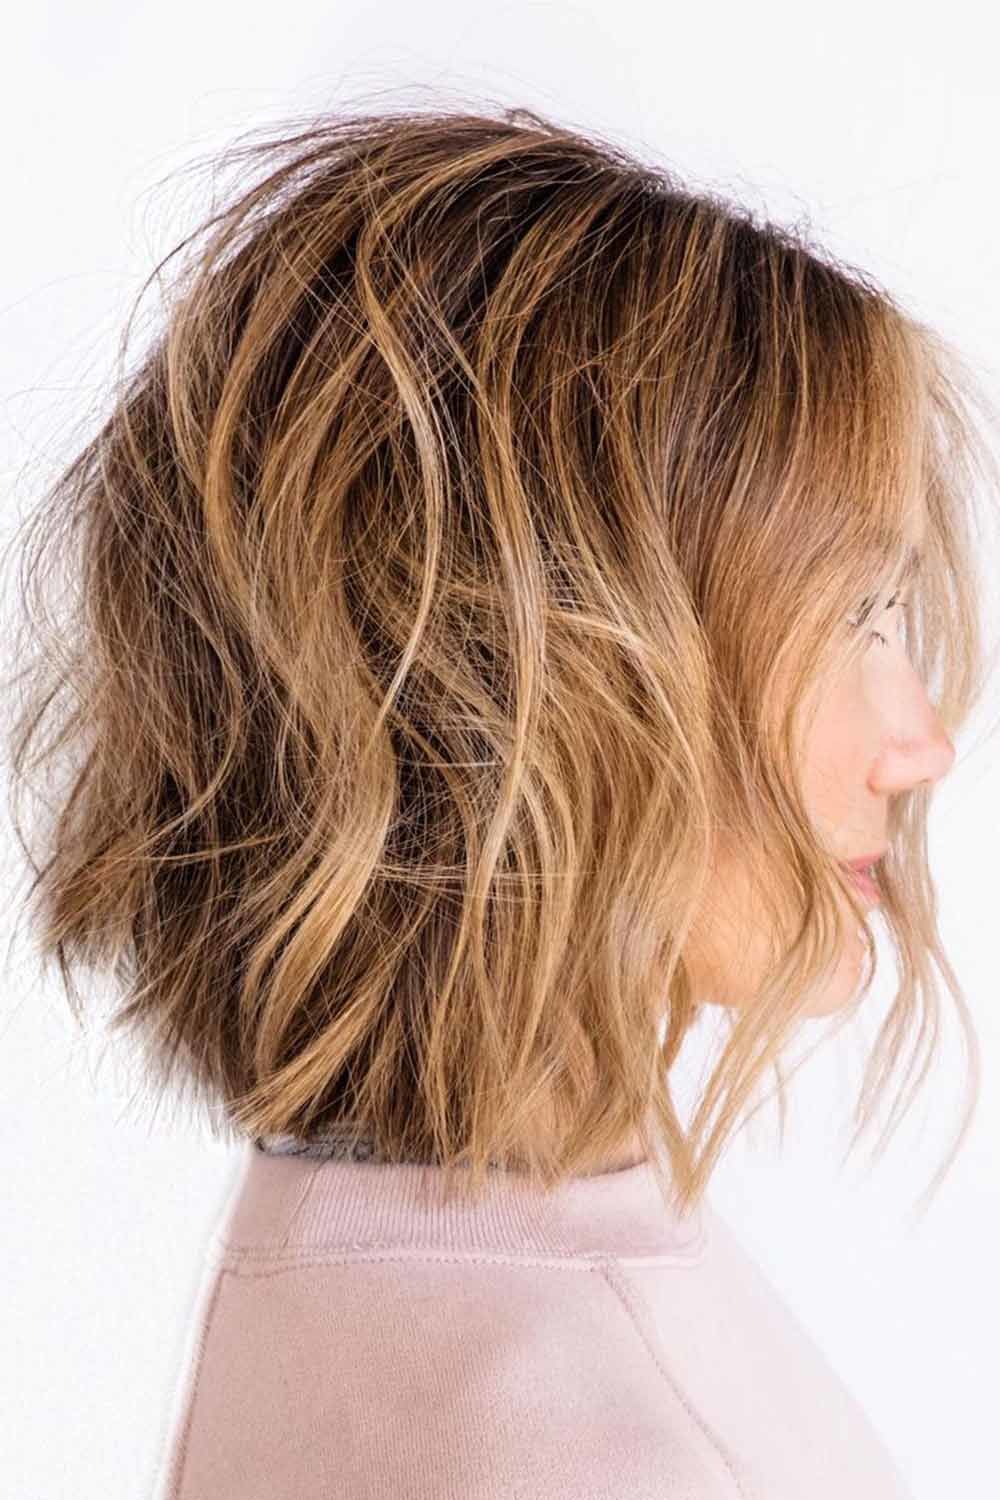 Highlights for Chic Short Hair